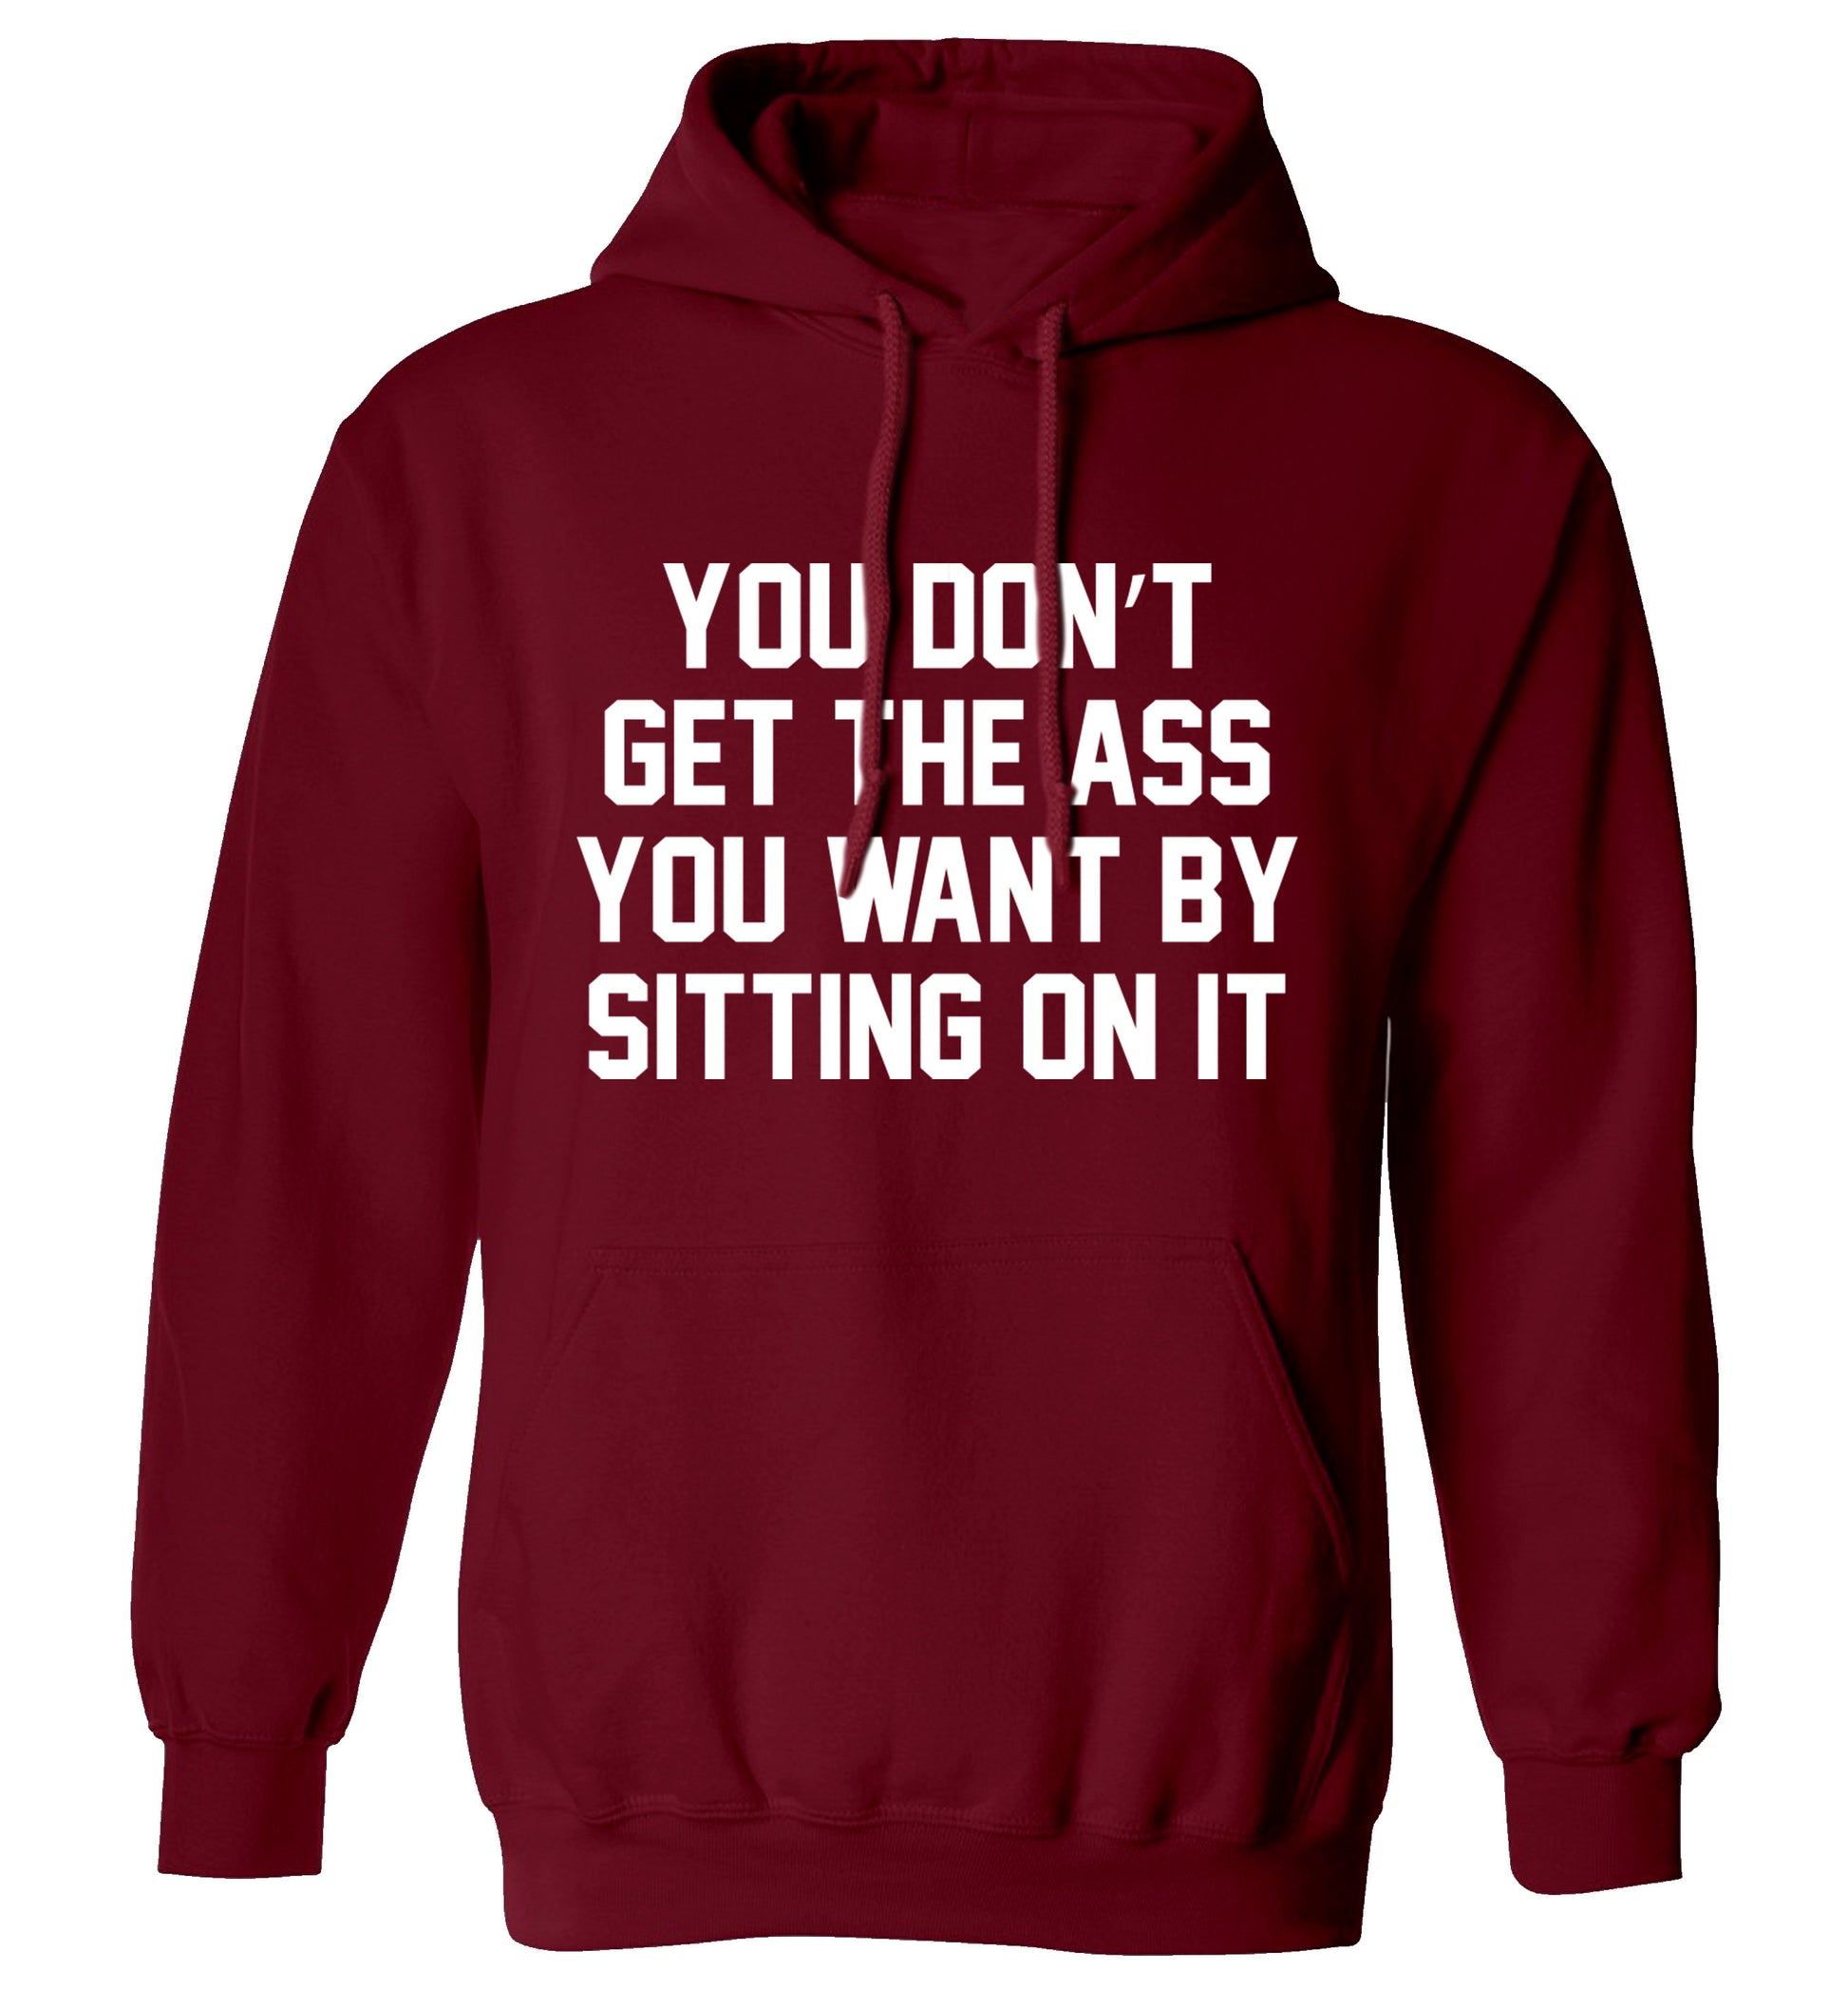 You don't get the ass you want by sitting on it adults unisex maroon hoodie 2XL